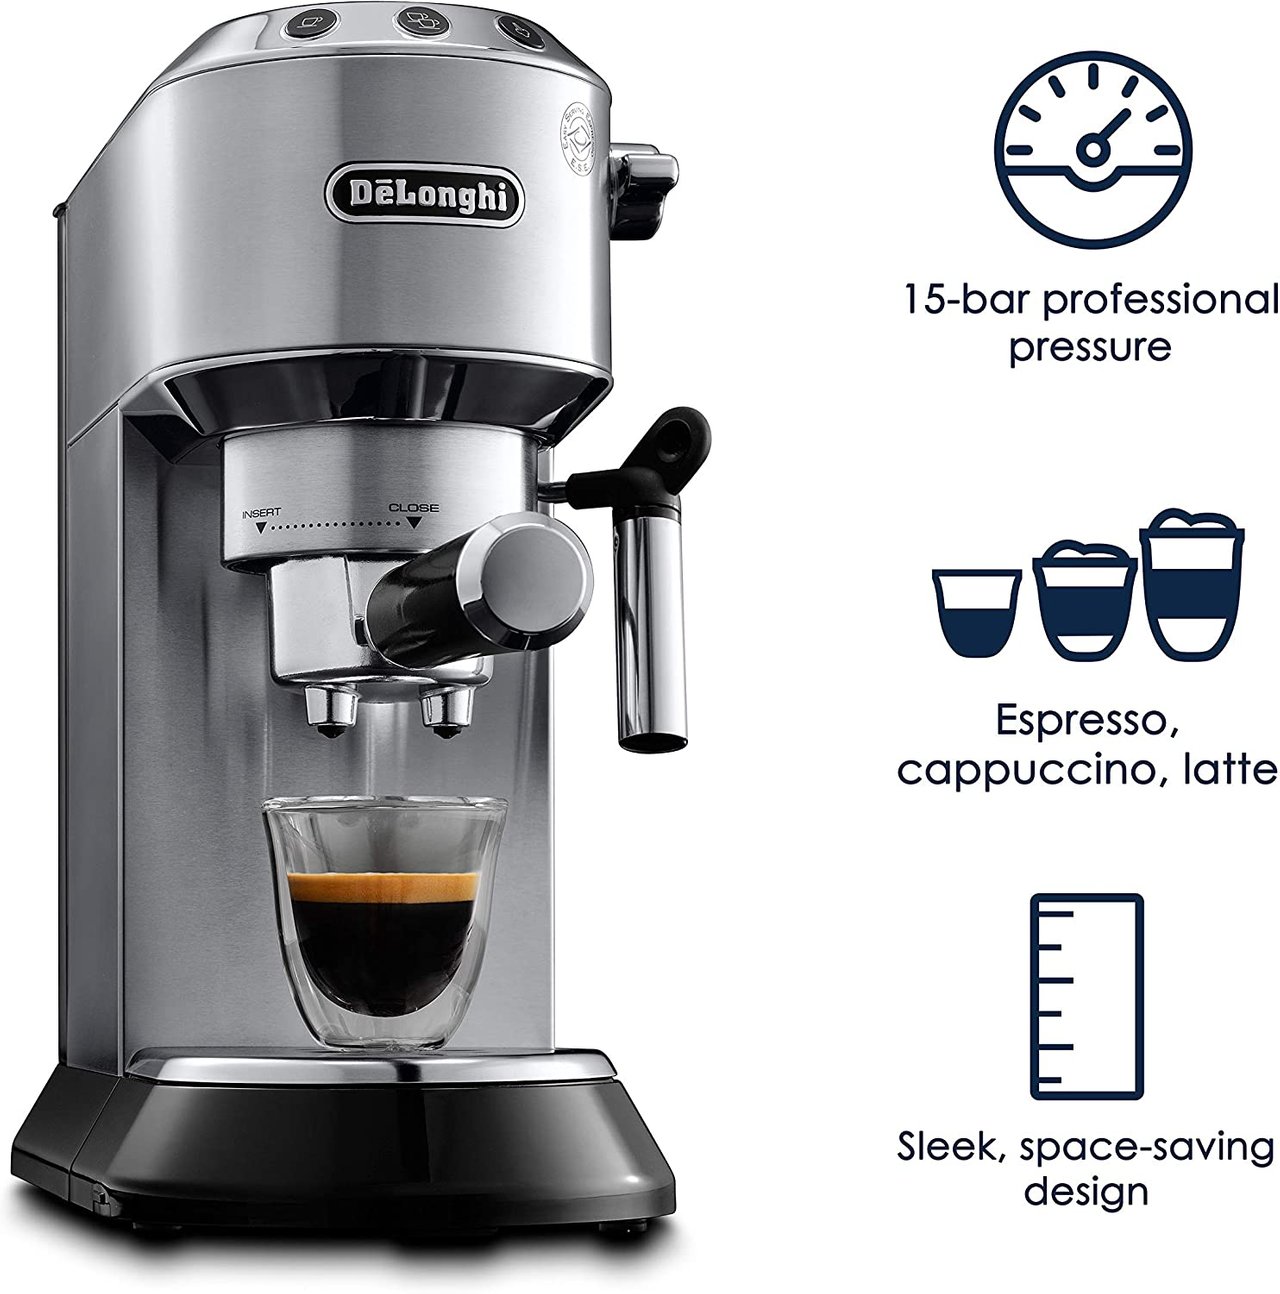 1 The De'Longhi EC680 Slim Stainless Steel Espresso and Cappuccino Machine with 15 Bar Pressure and Advanced Cappuccino System.